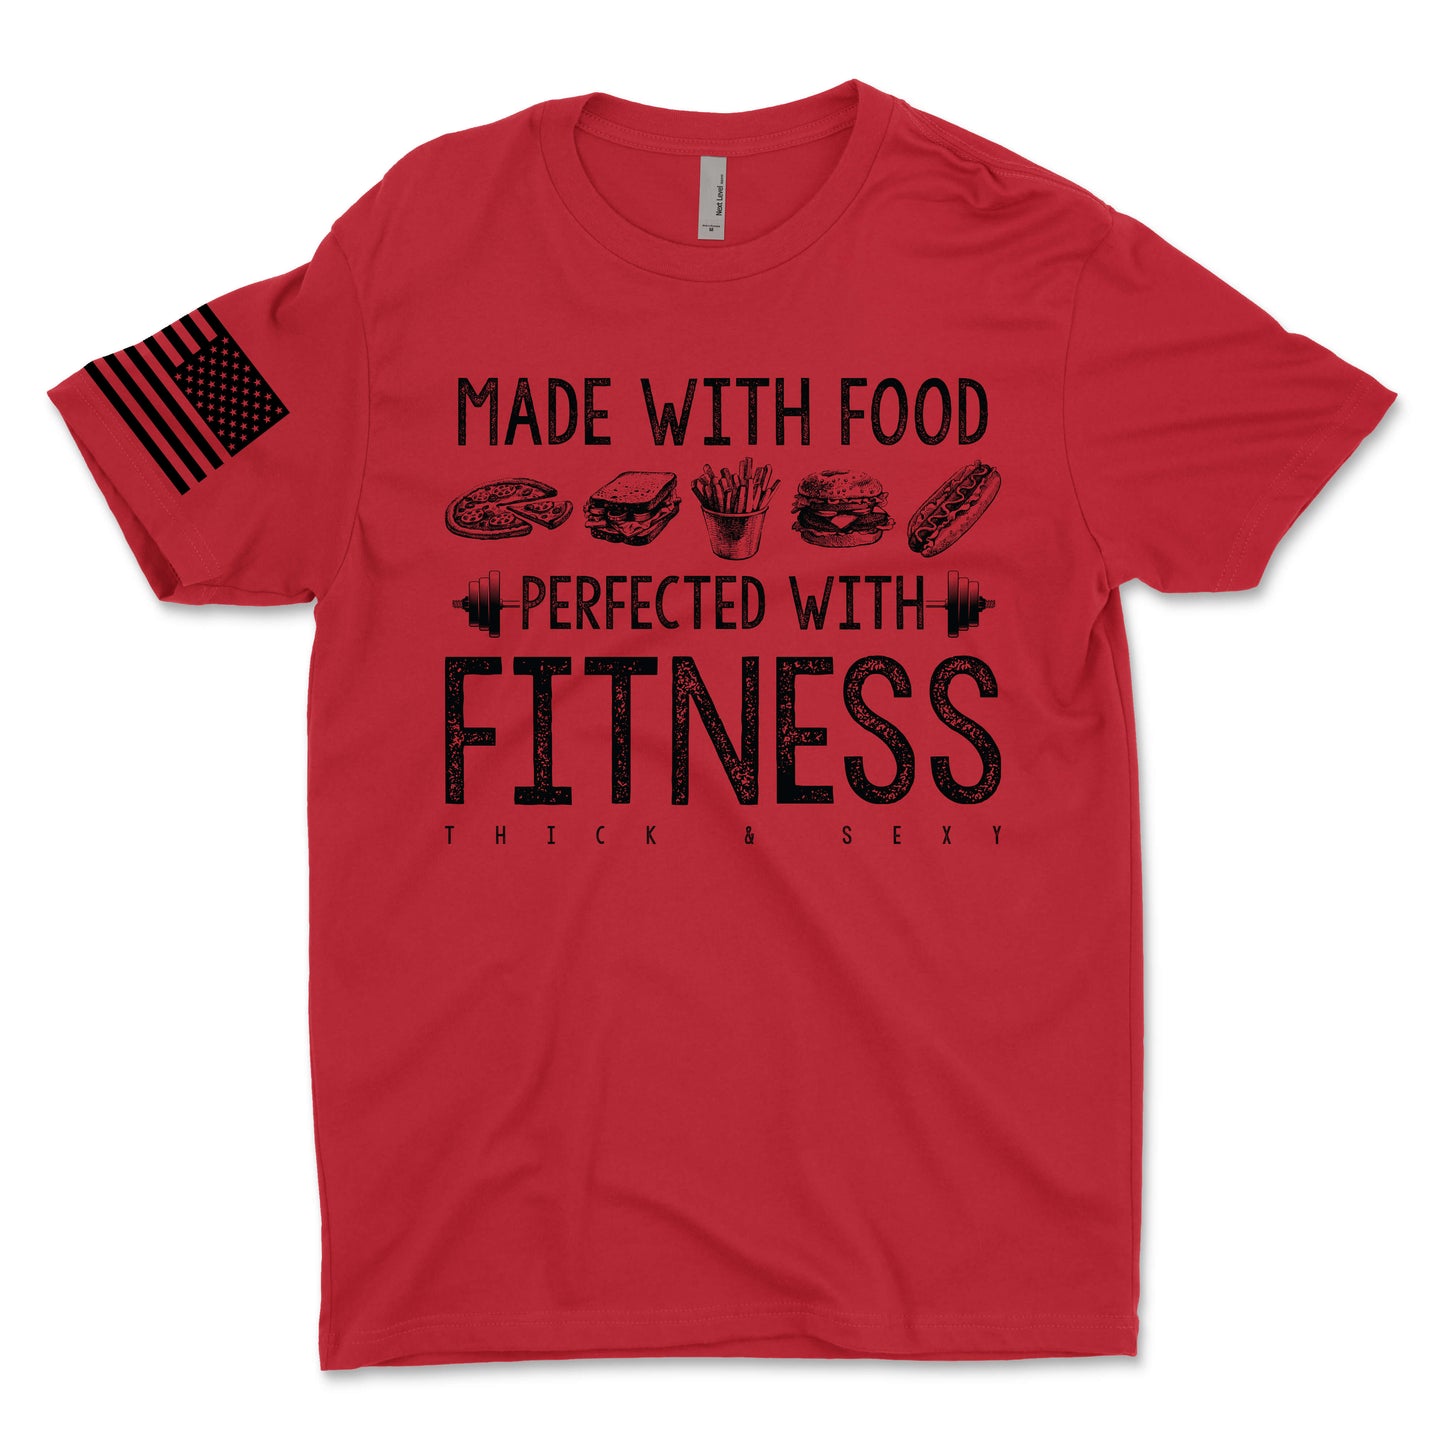 Made With Food Perfected With Fitness Men's T-Shirt